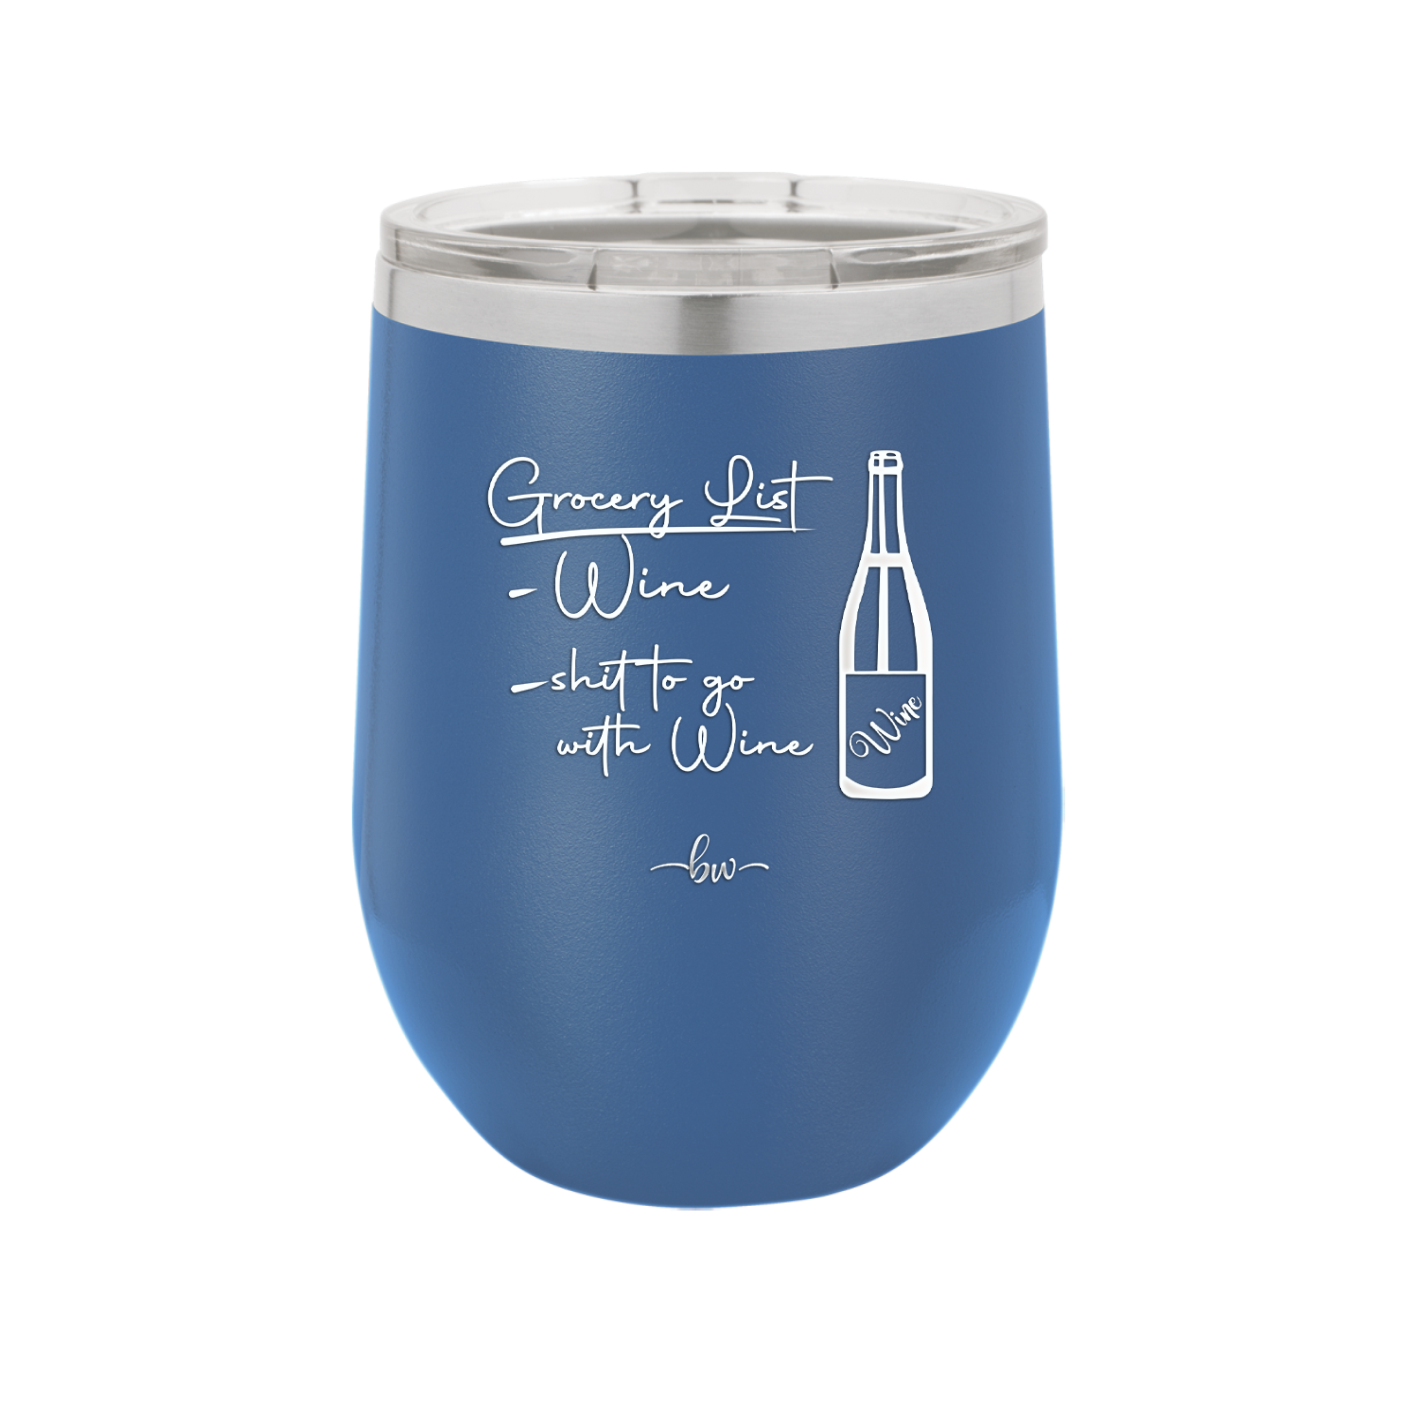 Grocery List Wine and Shit to Go with Wine - Laser Engraved Stainless Steel Drinkware - 2113 -